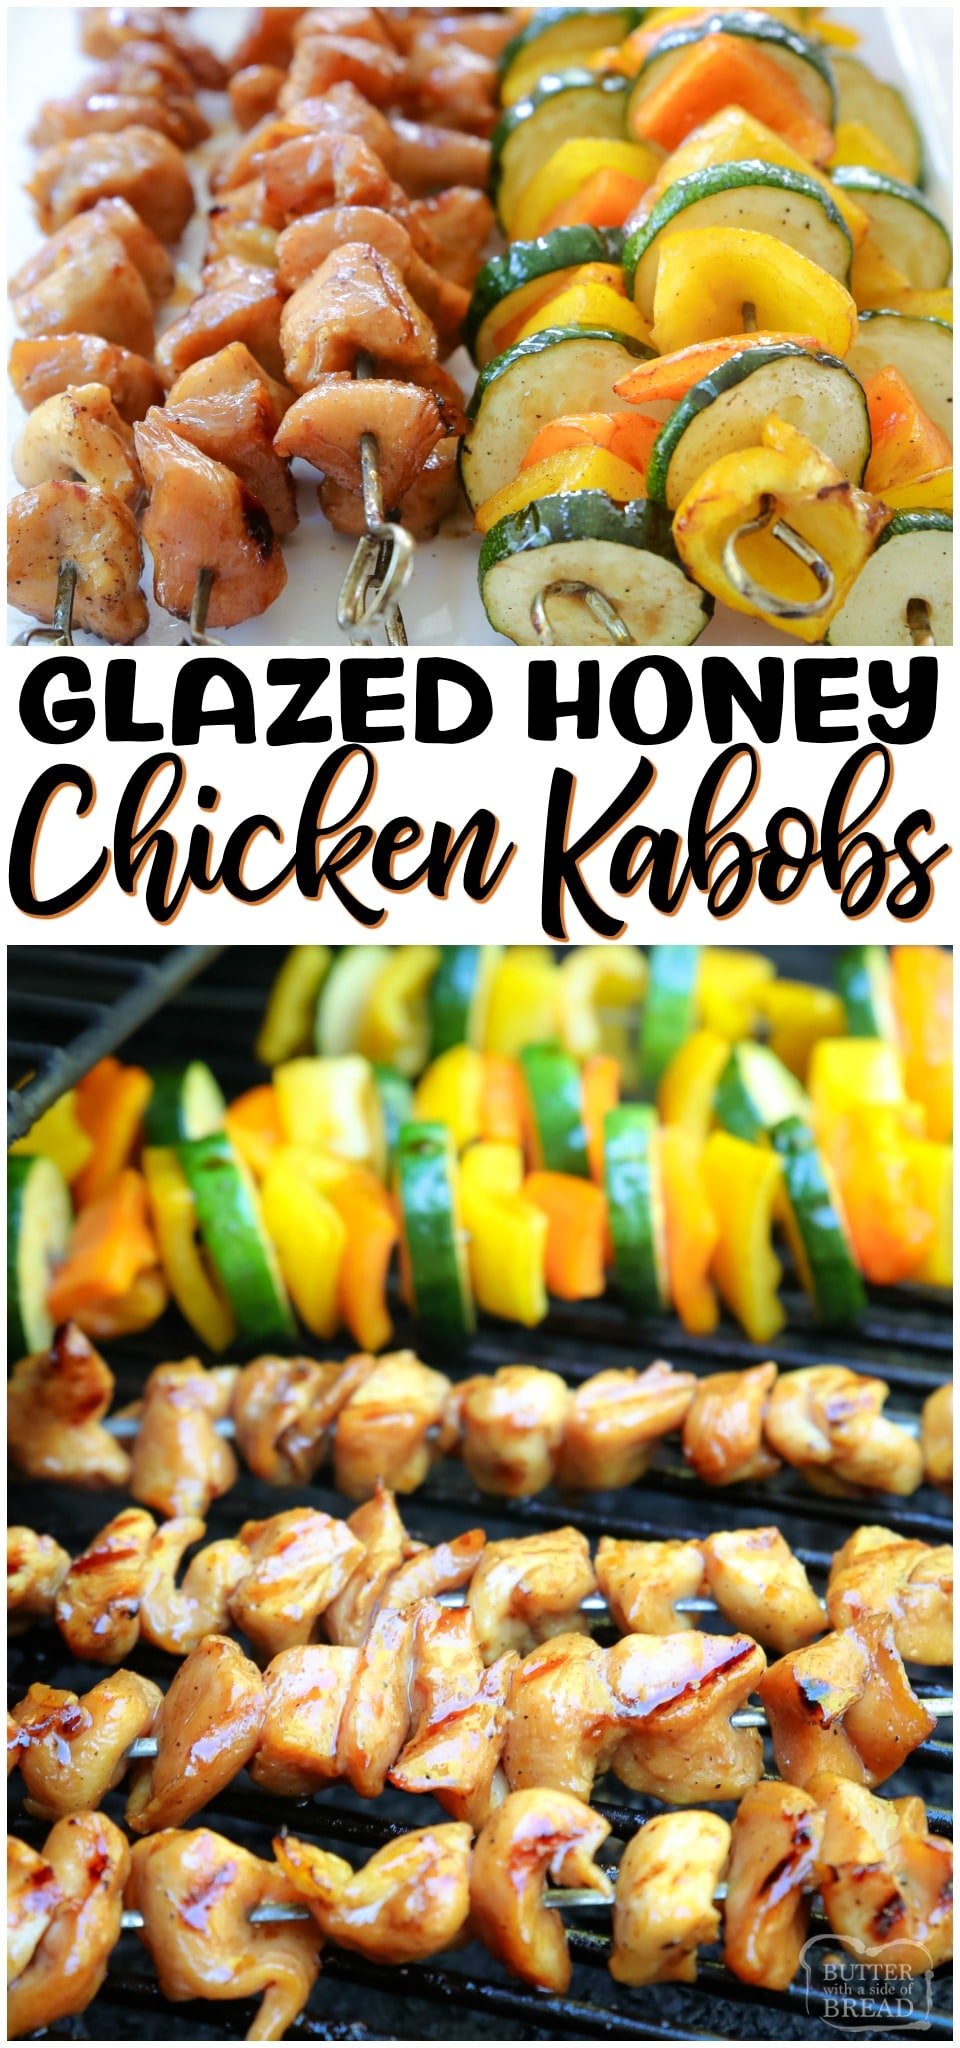 Honey Chicken Kabobs are perfect for summer grilling! Sweet & tangy grilled chicken marinade recipe yields tender, juicy & flavorful chicken. Don't forget the veggie kabobs! #chicken #grilled #kabobs #dinner #recipe from BUTTER WITH A SIDE OF BREAD